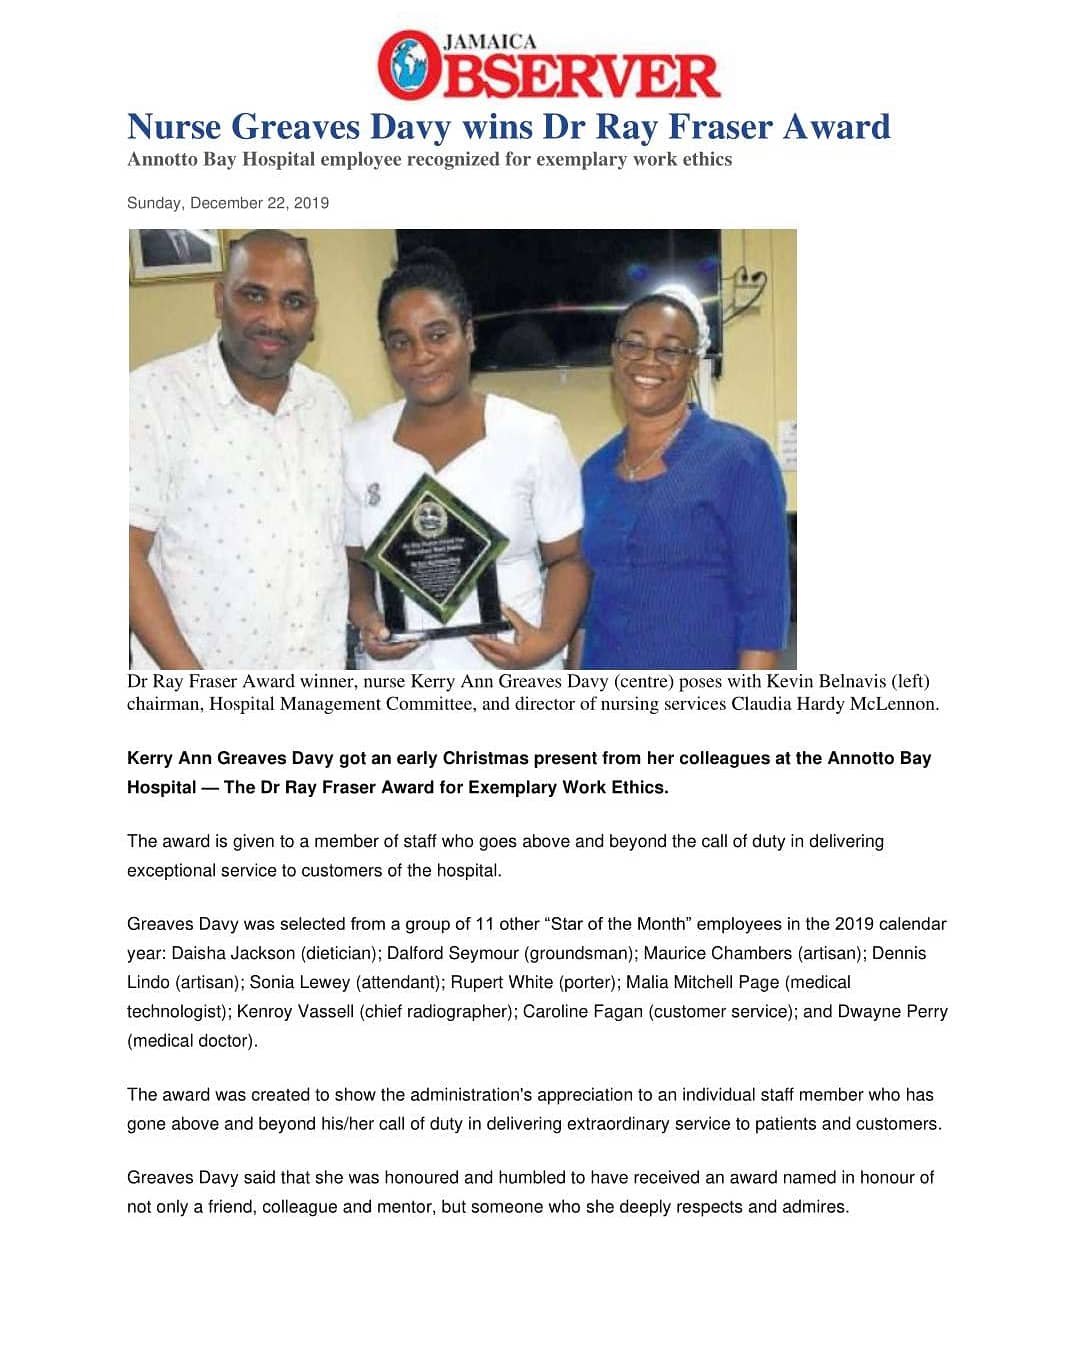 MOHNERHA on X: Jamaica Observer article: Nurse Greaves Davy wins